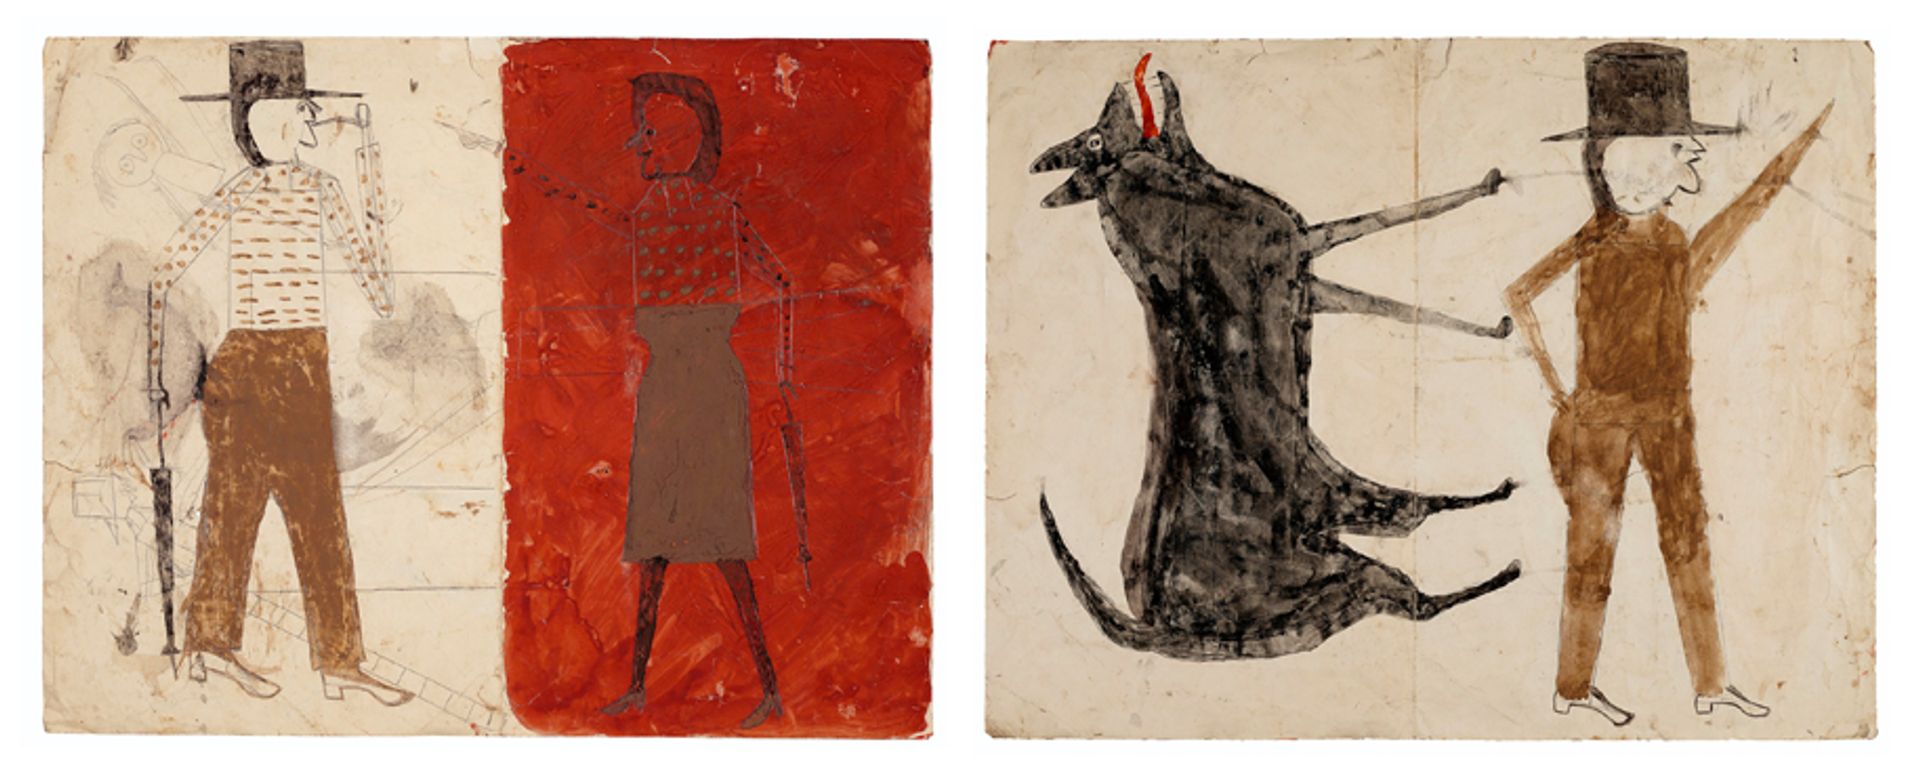 American self-taught artist Bill Traylor (1853-1949) picked up a new artist record at Christie’s 17 January sale when a double-sided work sold for $507,000 to a private collector. Christie's